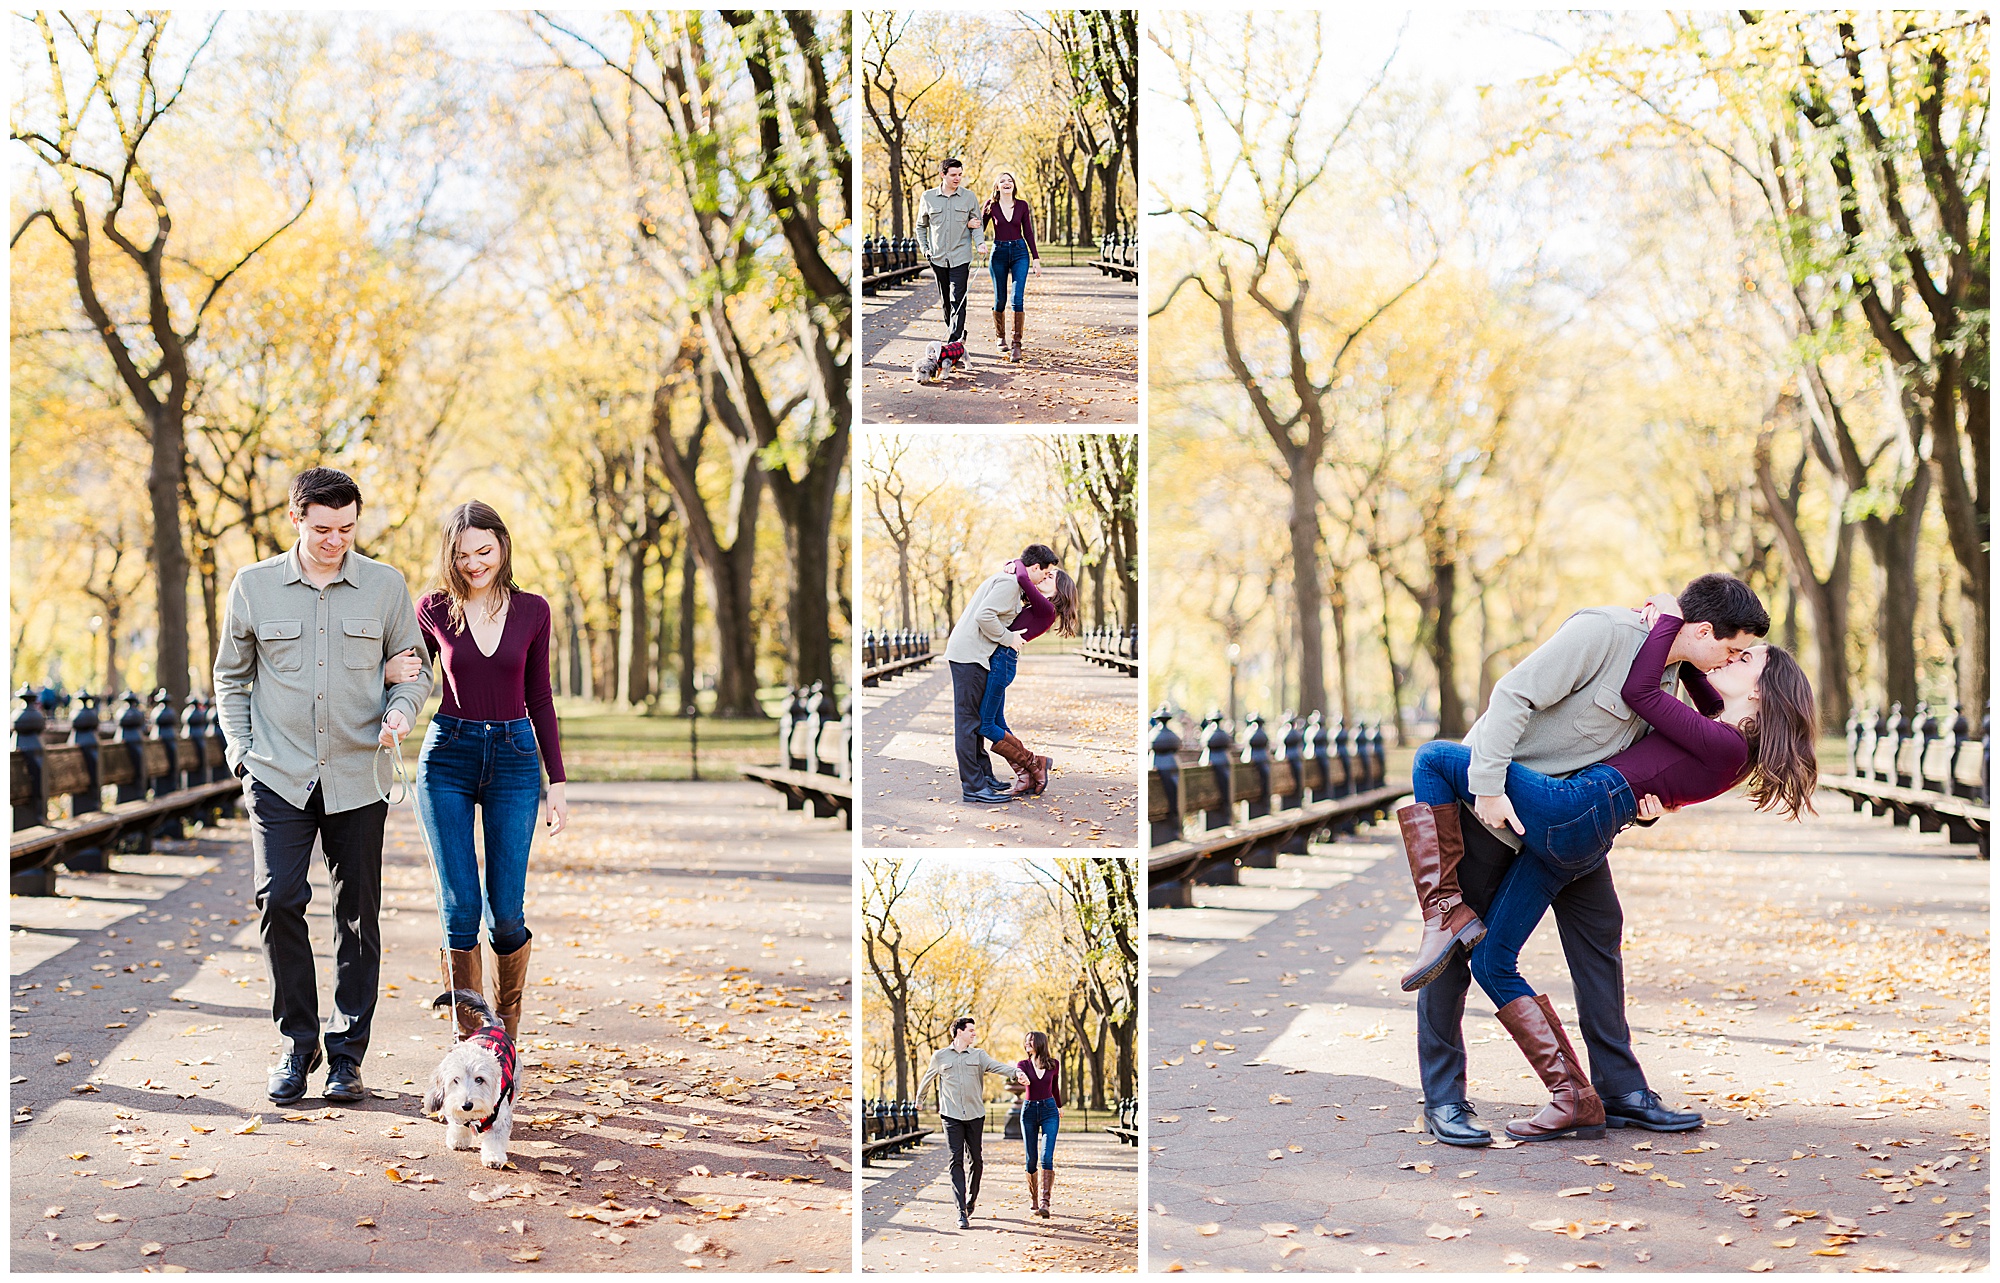 Romantic Engagement Photoshoot in Central Park